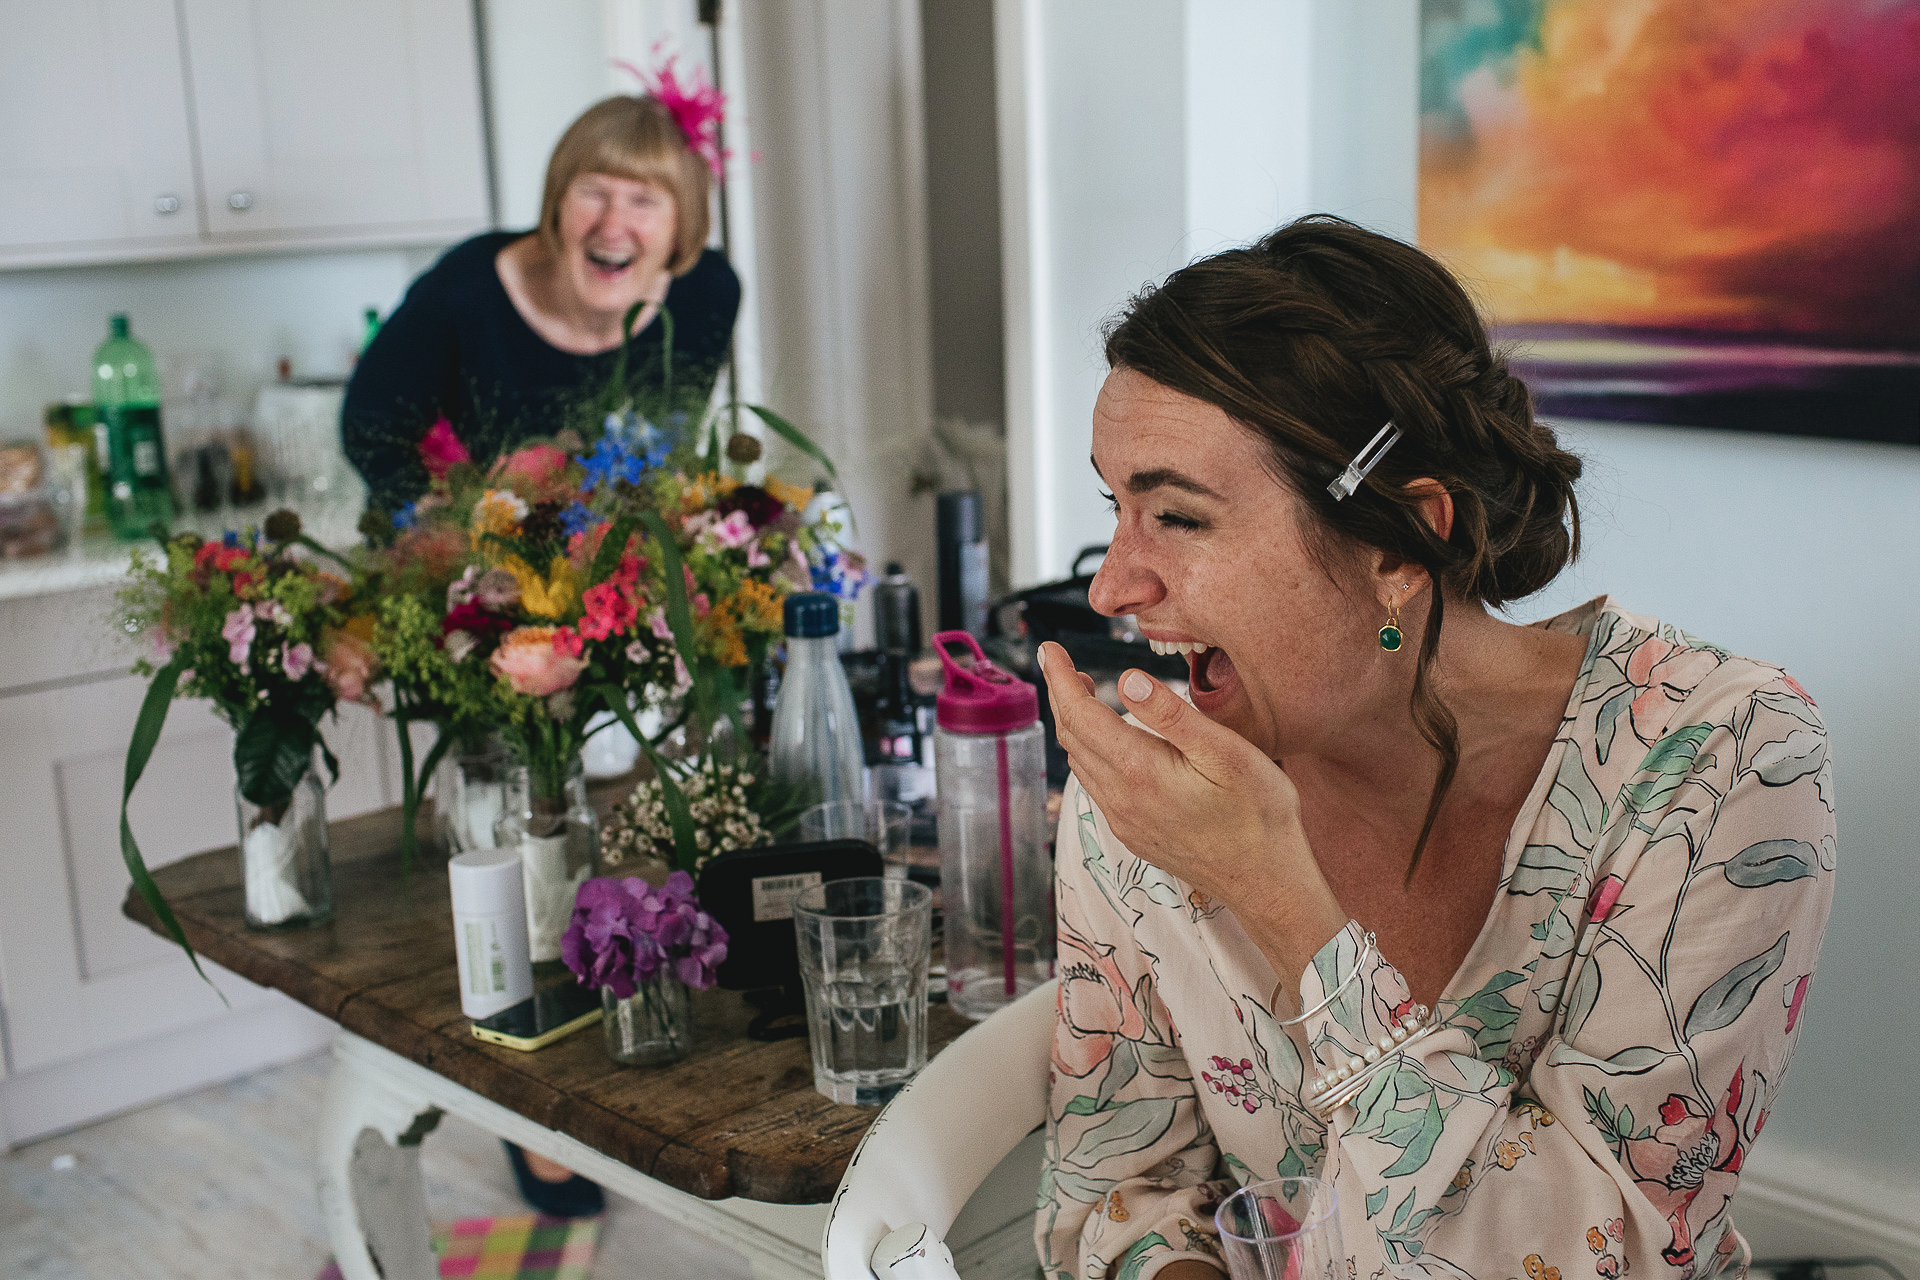 Bride to be laughing with mother during wedding preparations